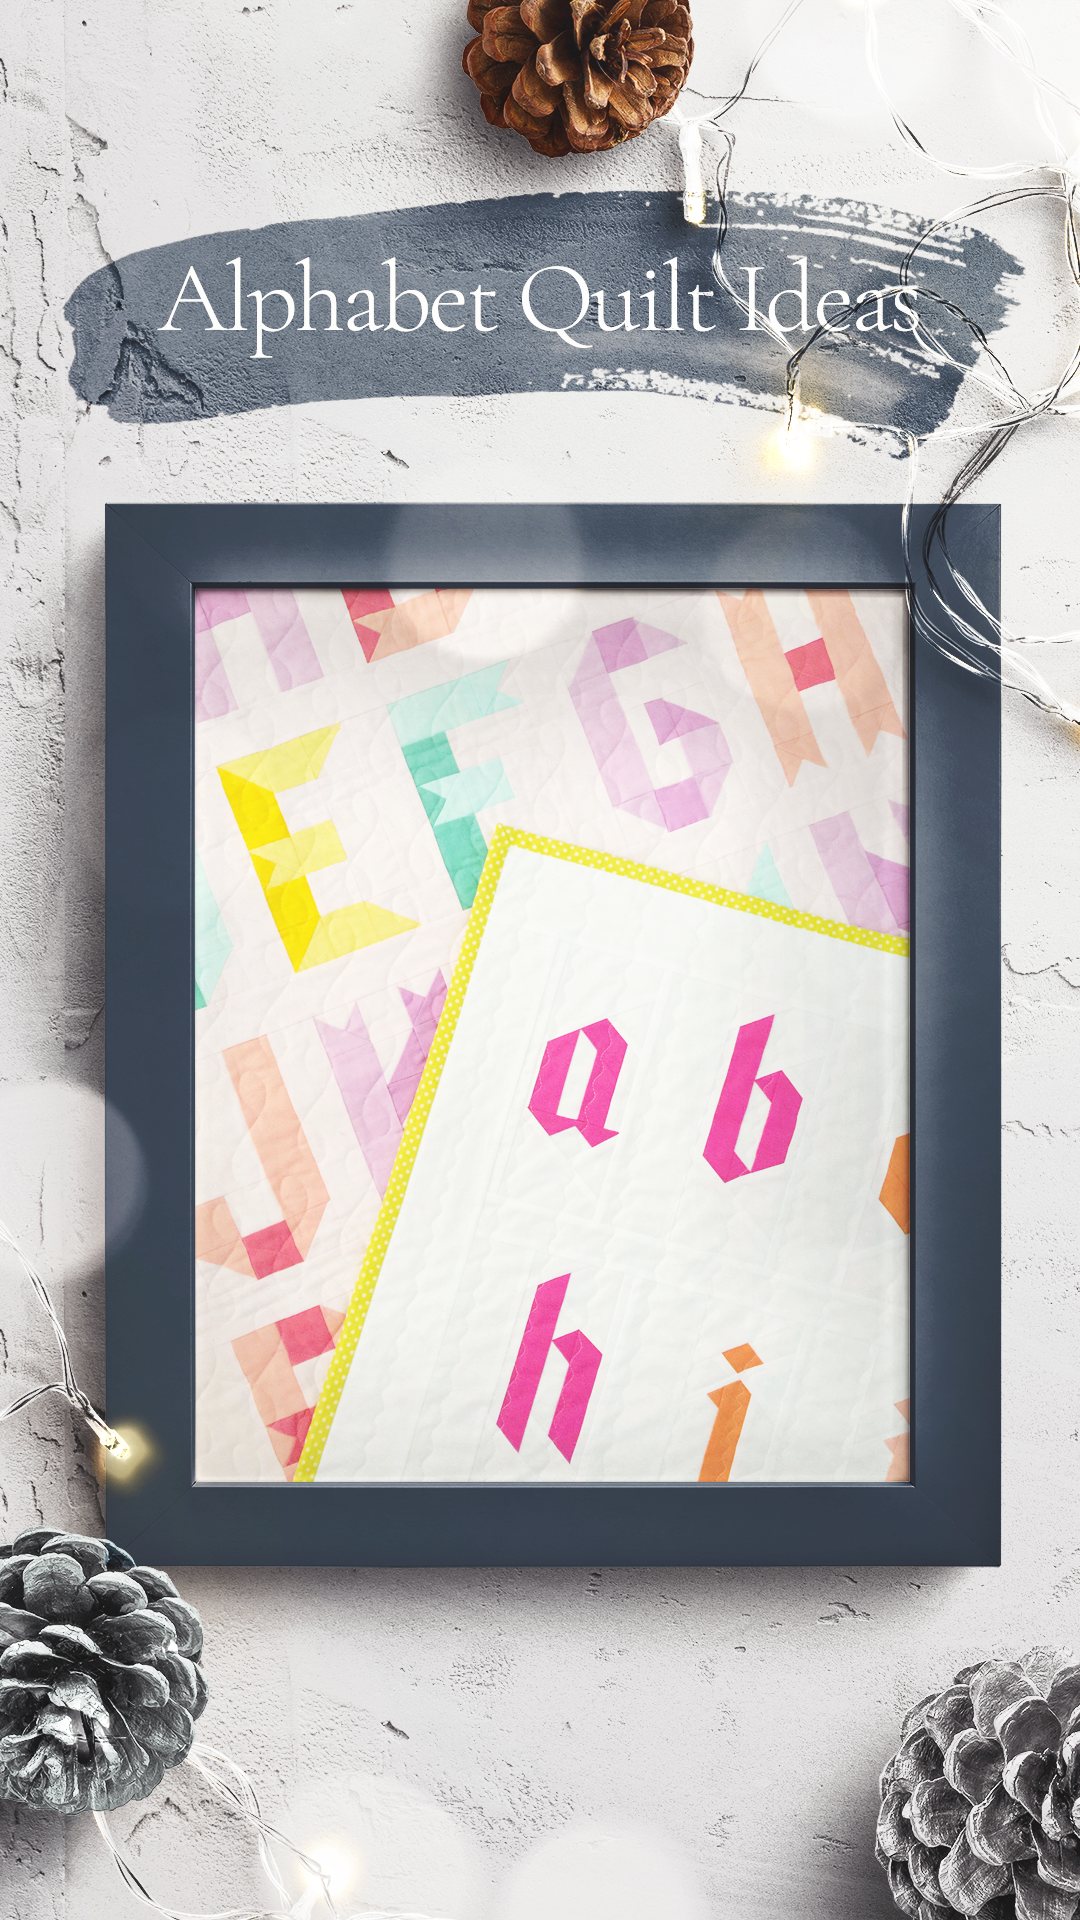 Alphabet Quilt Patterns by Patch and Dot